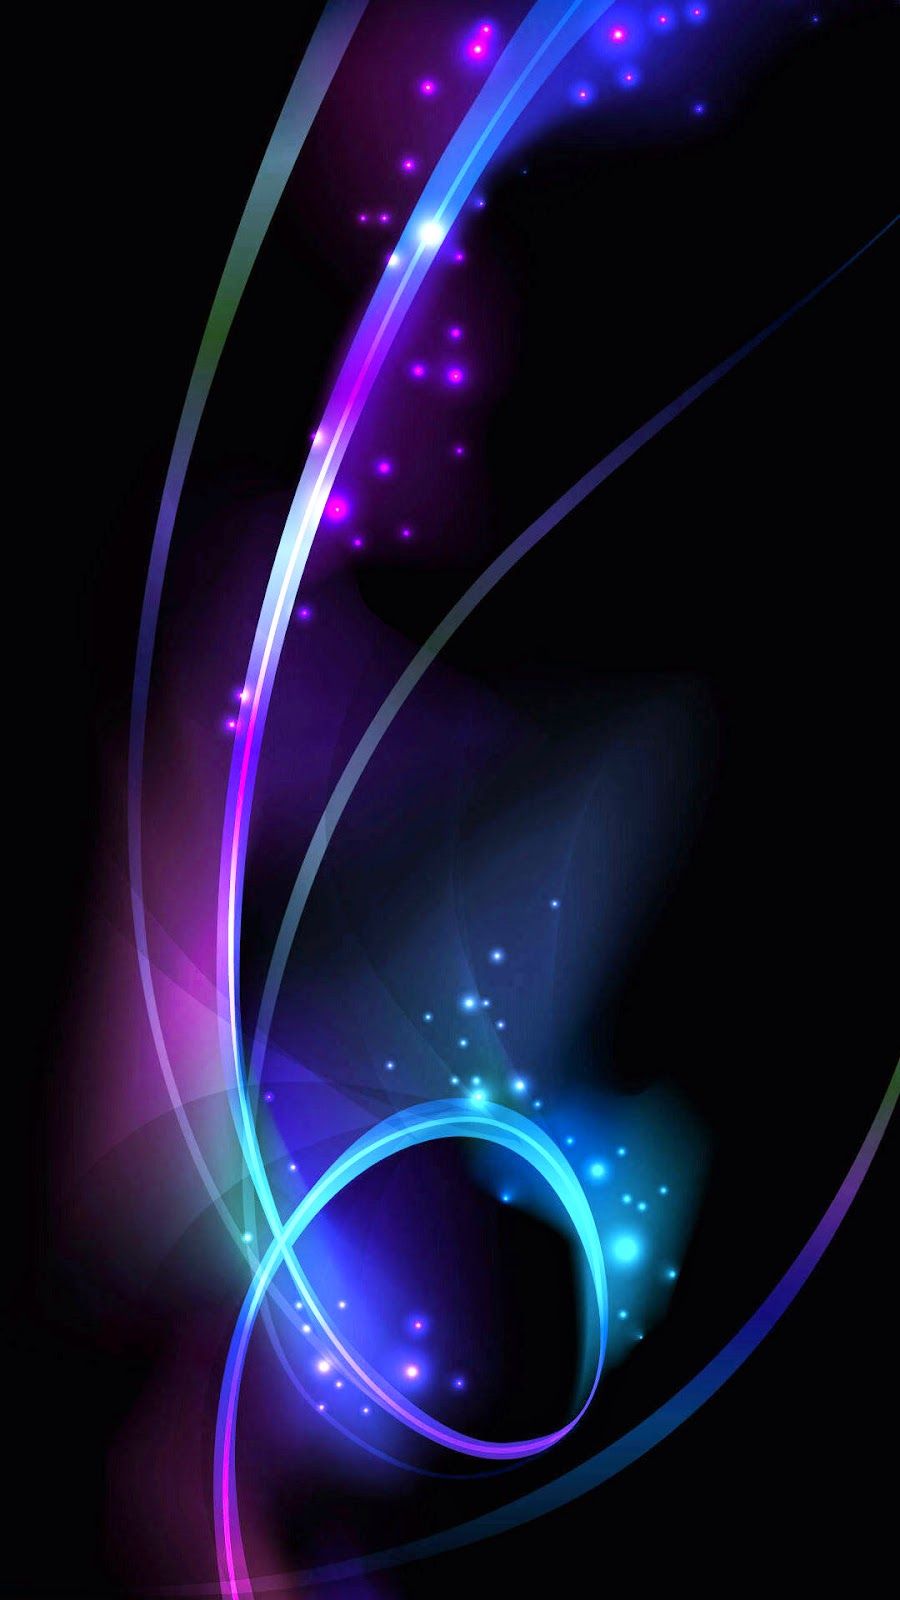 phone wallpapers and themes,purple,violet,blue,light,neon